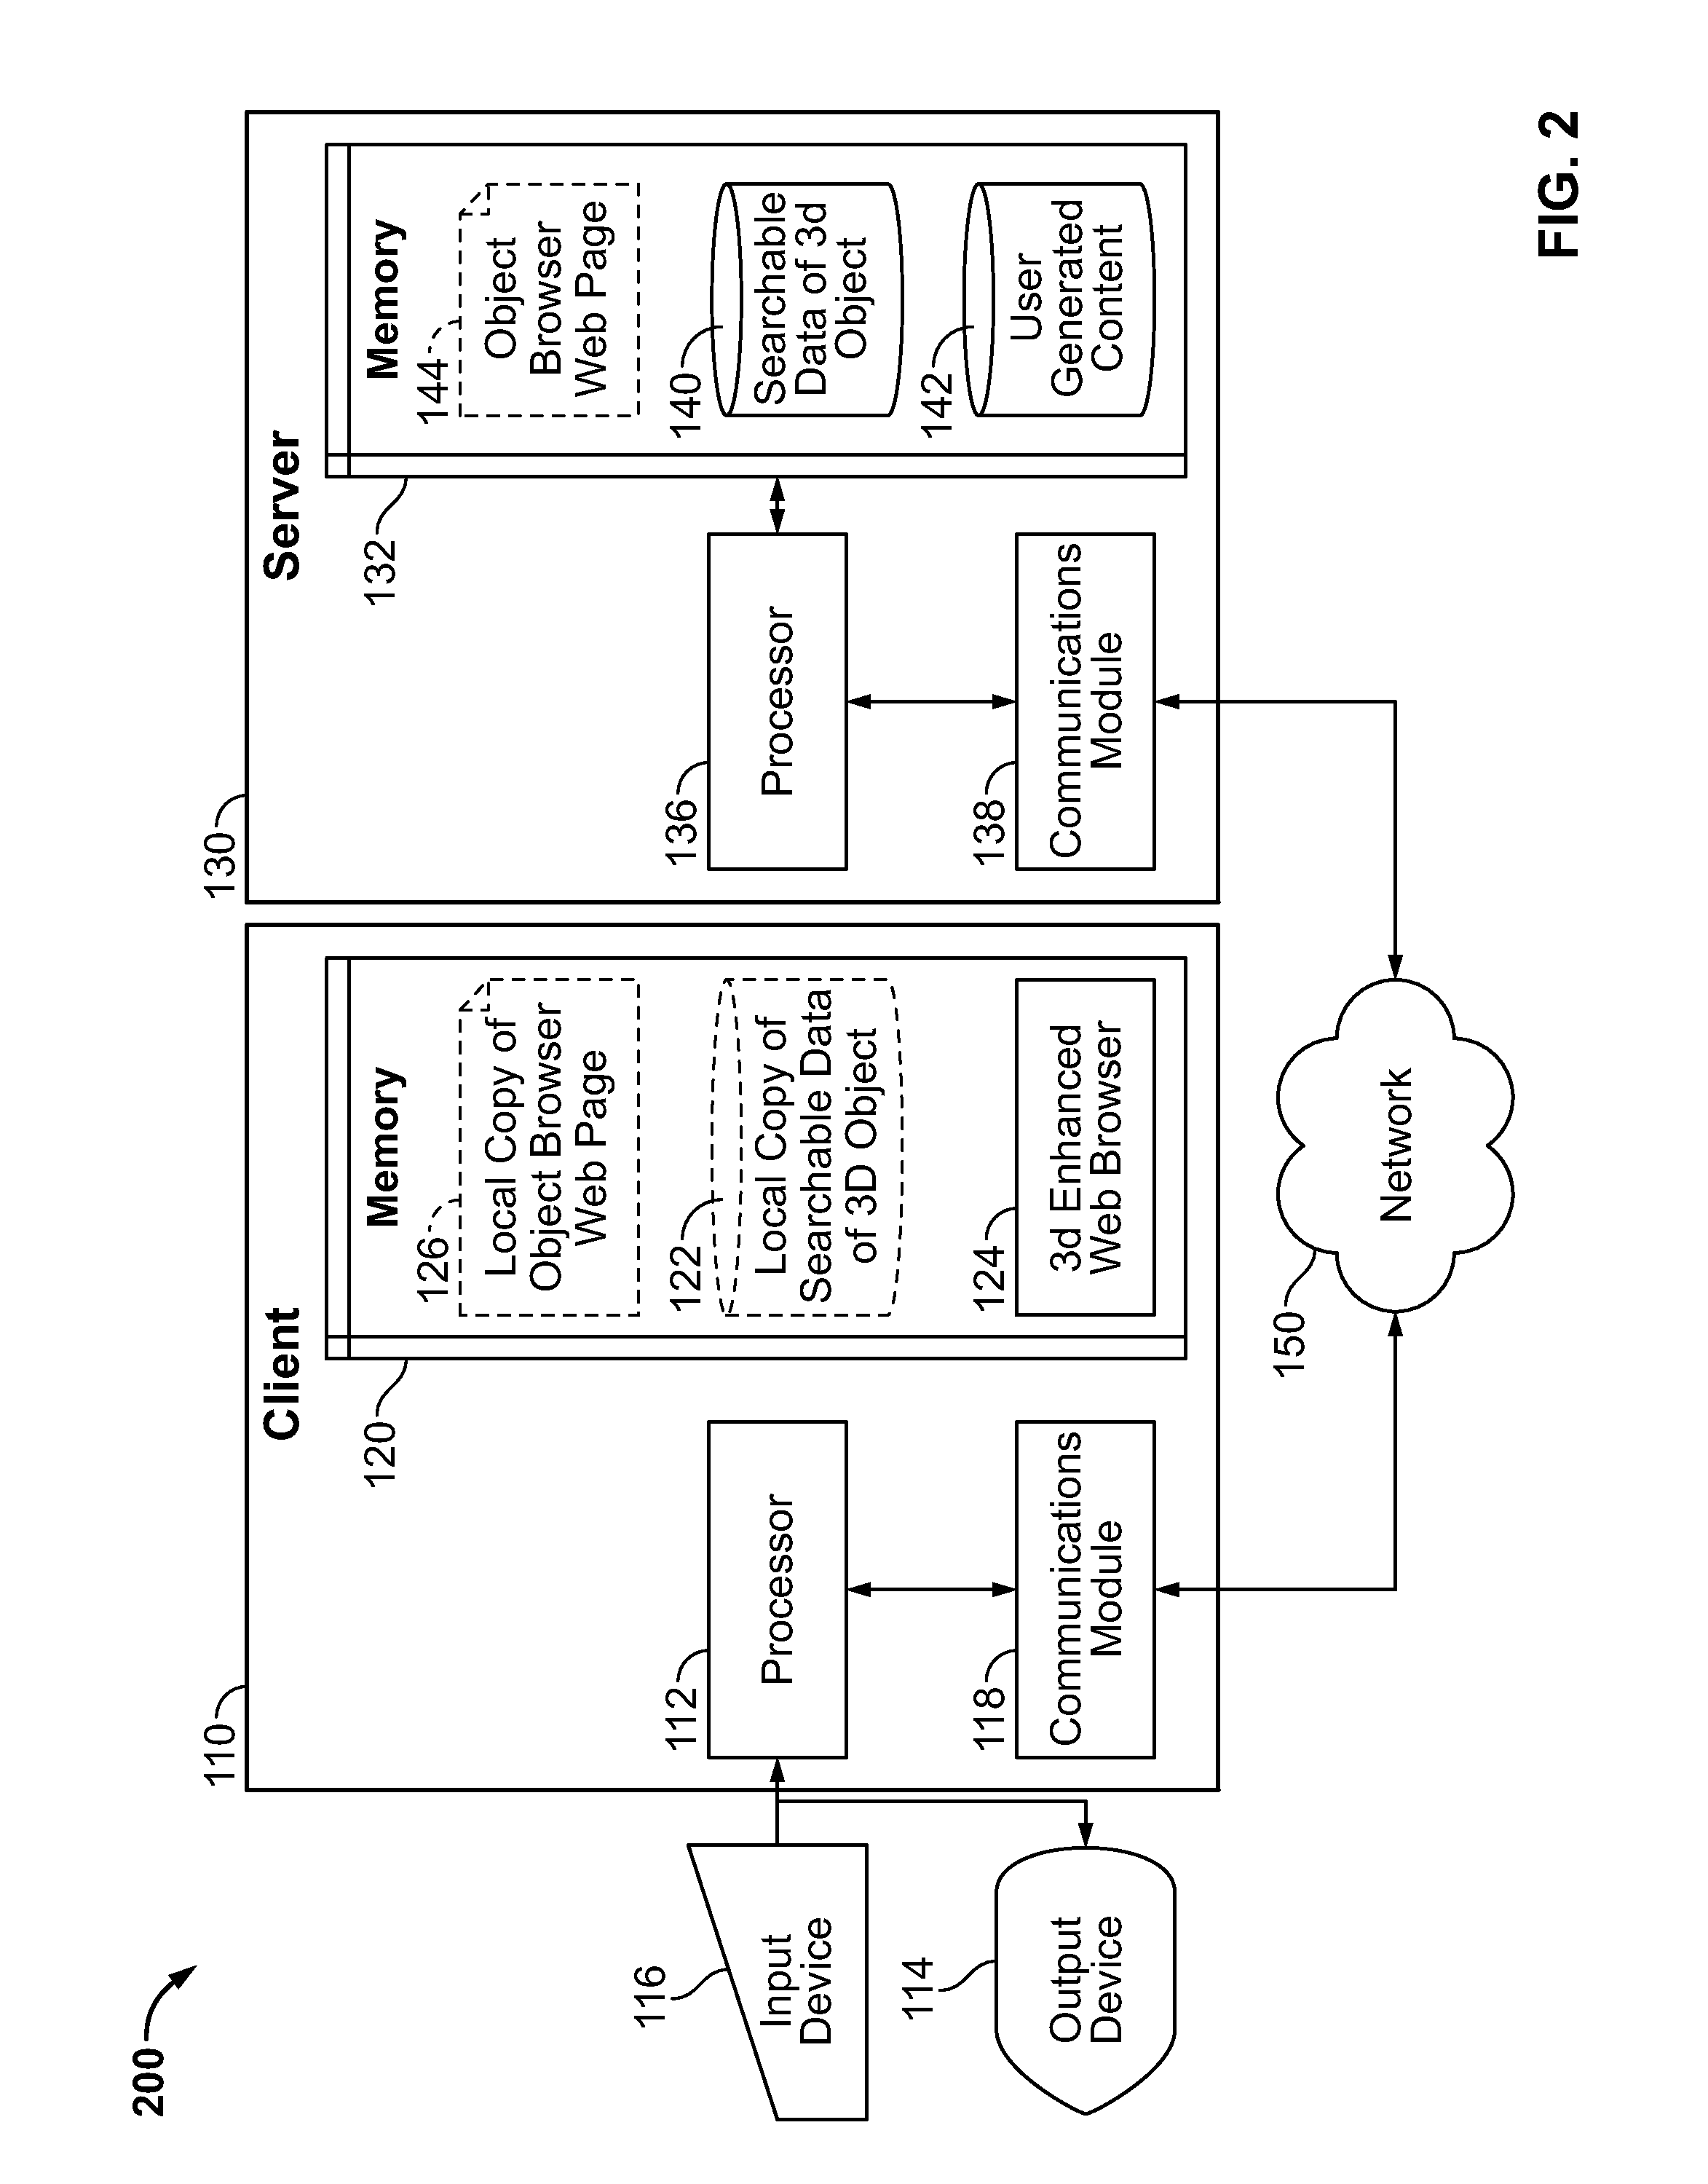 Layer opacity adjustment for a three-dimensional object